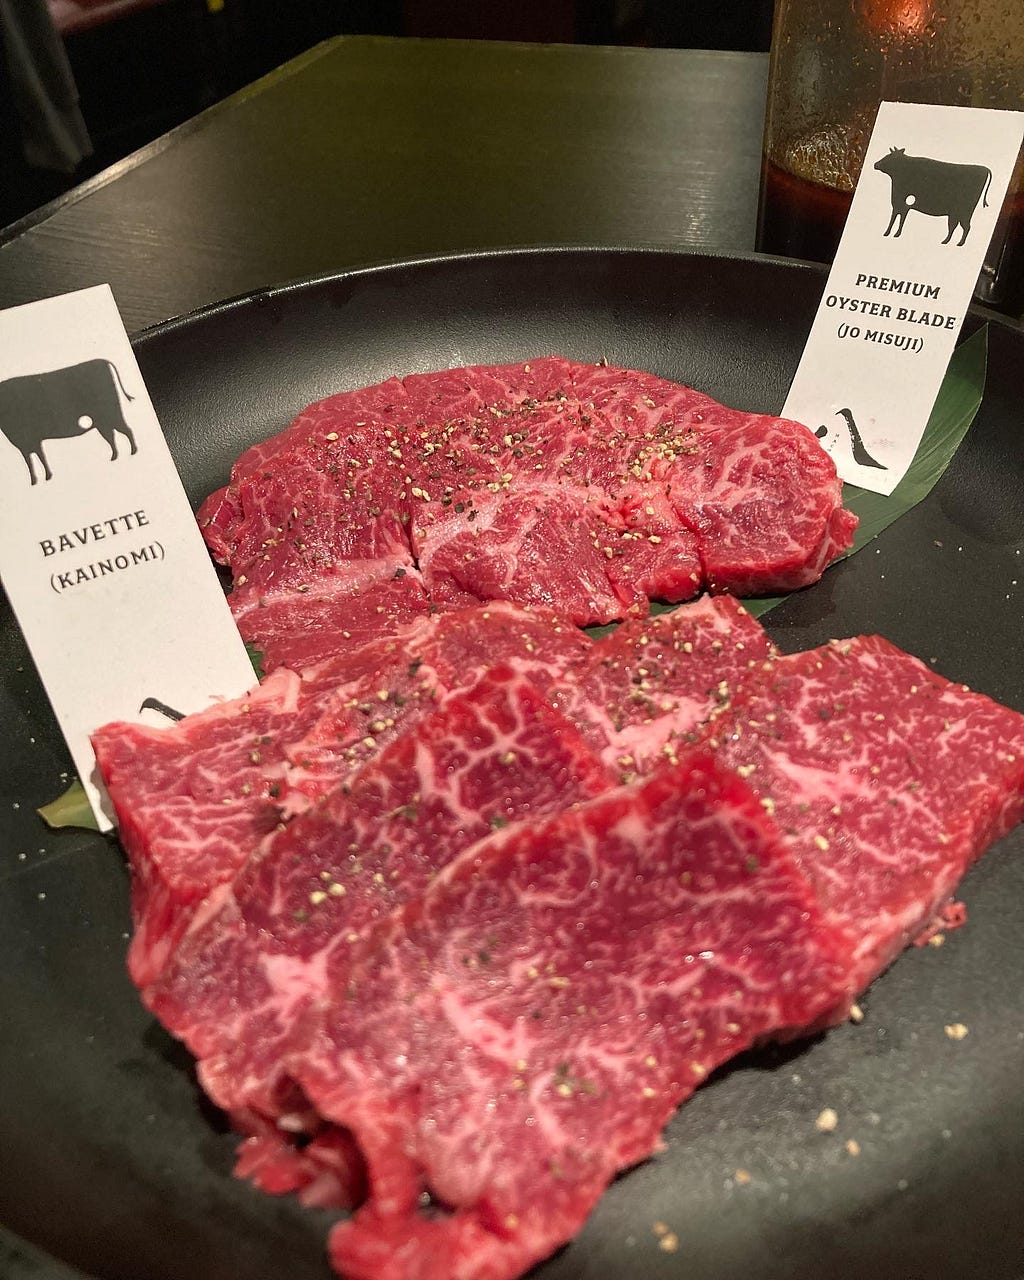 All beef cuts came with a label.